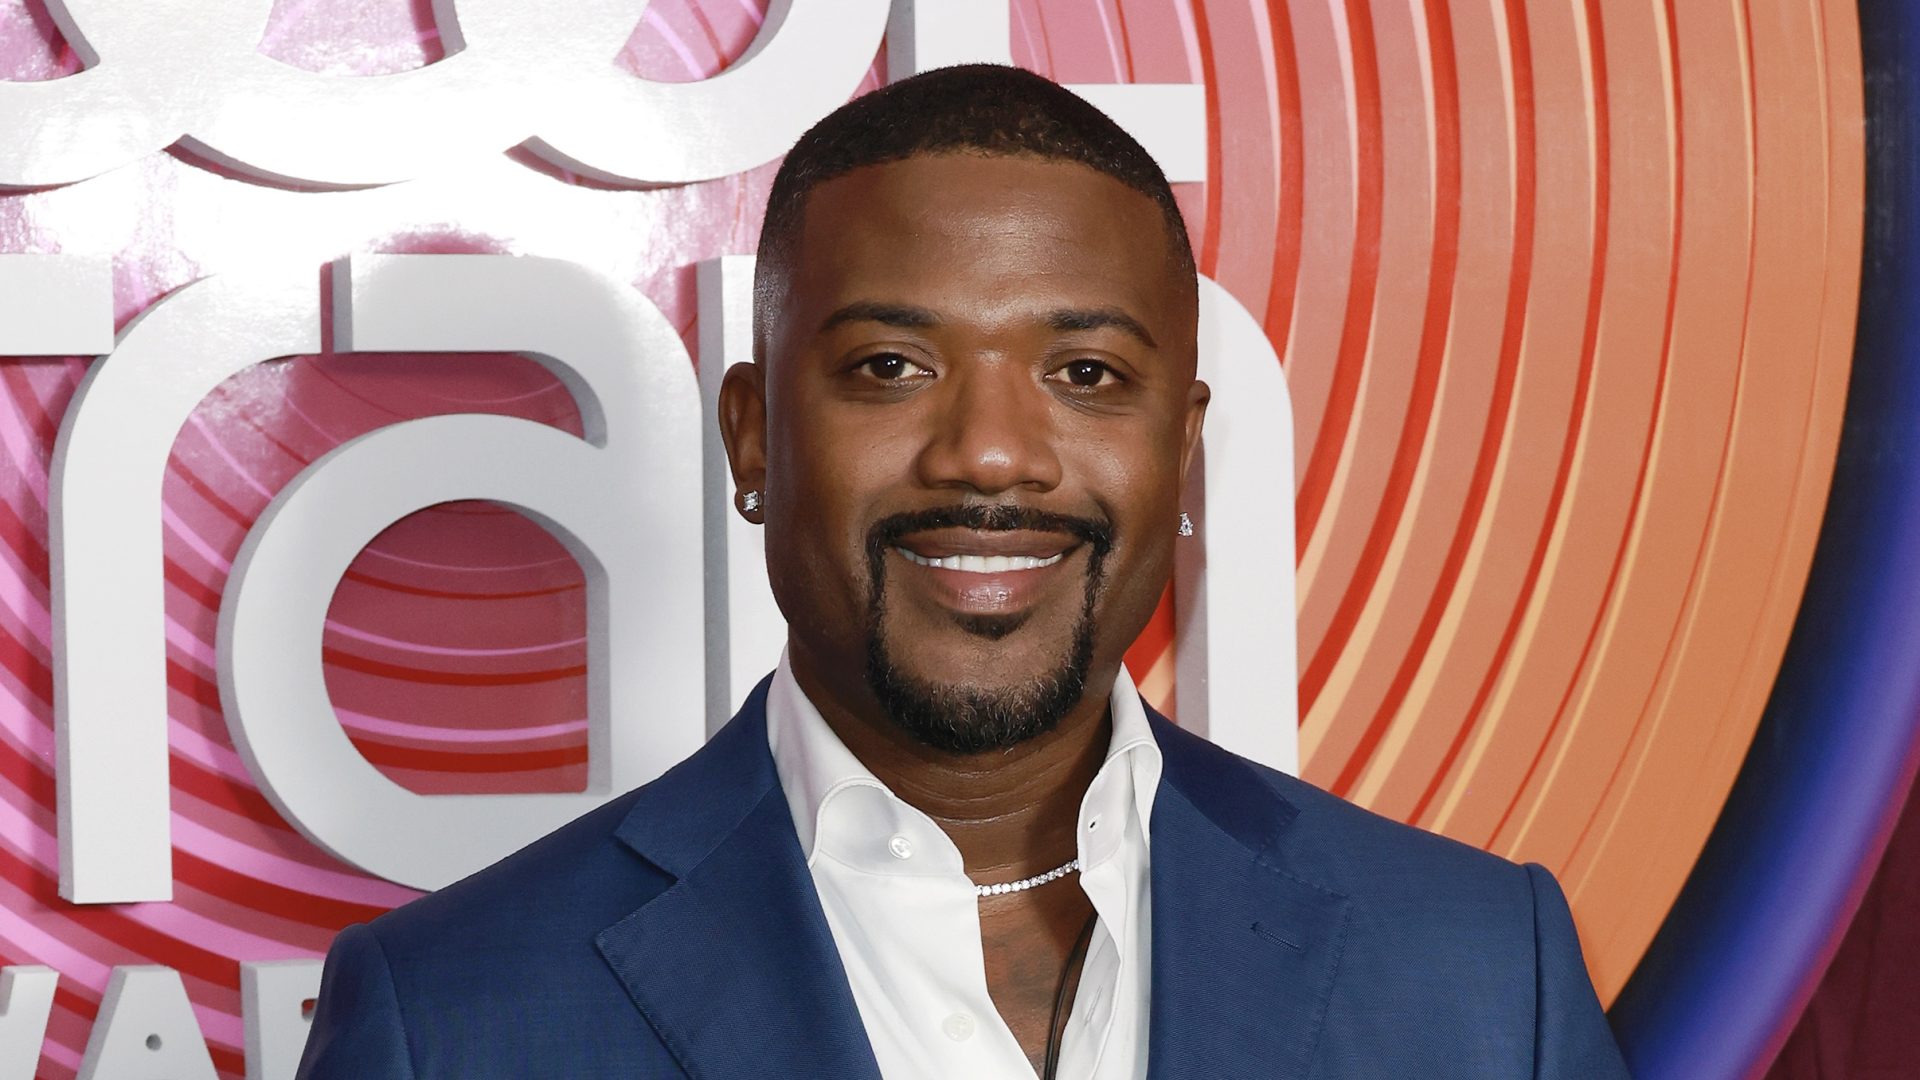 Ray J Addresses Public Concern After Revealing His New Face Tattoos (WATCH) thumbnail